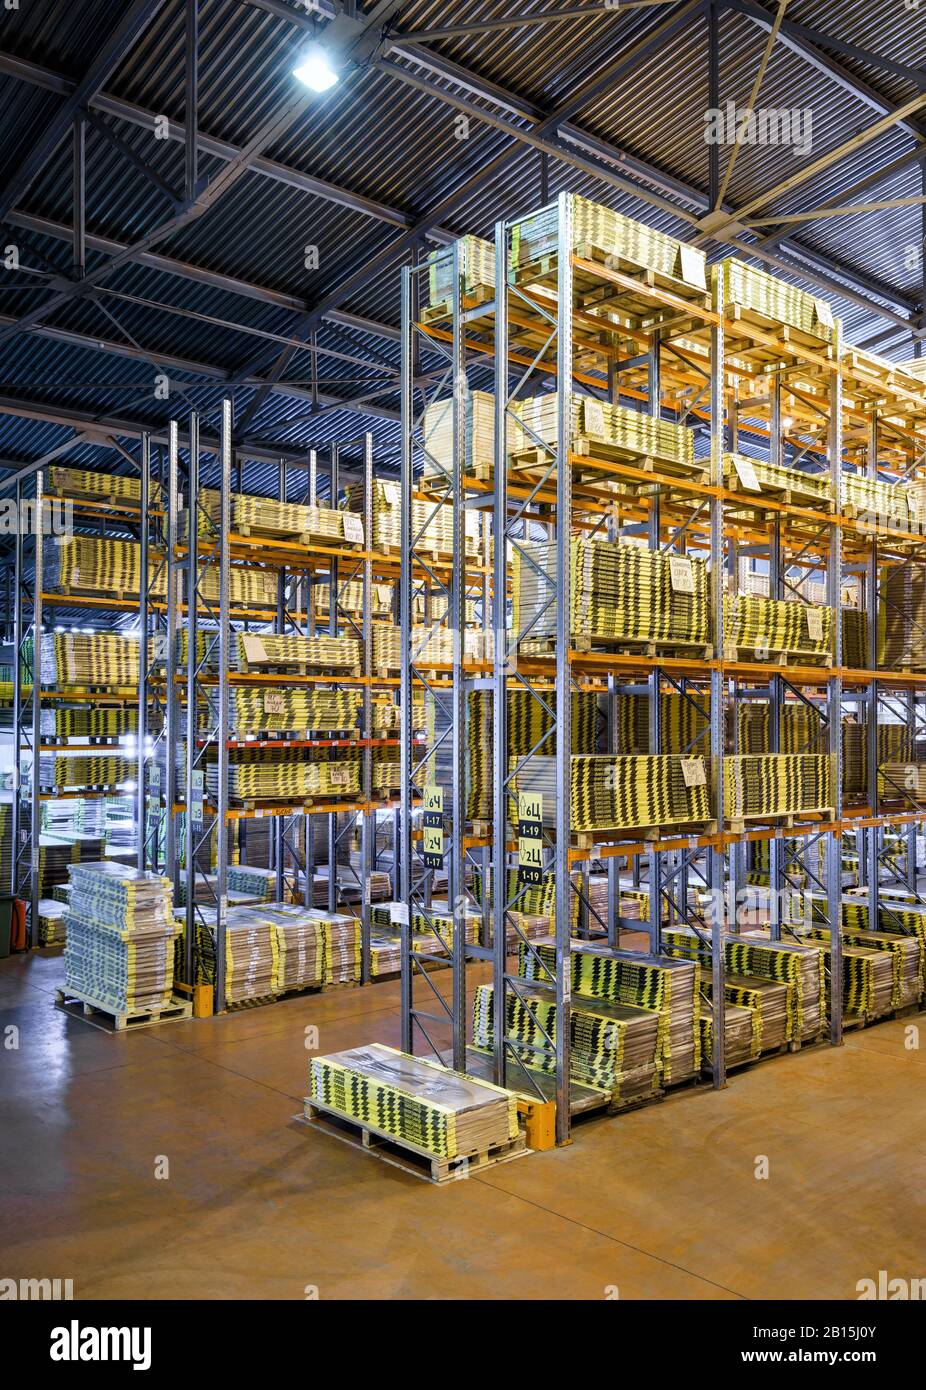 Moscow - August 1, 2017: The large modern warehouse. Moscow is a modern city with well-developed logistics infrastructure. Stock Photo